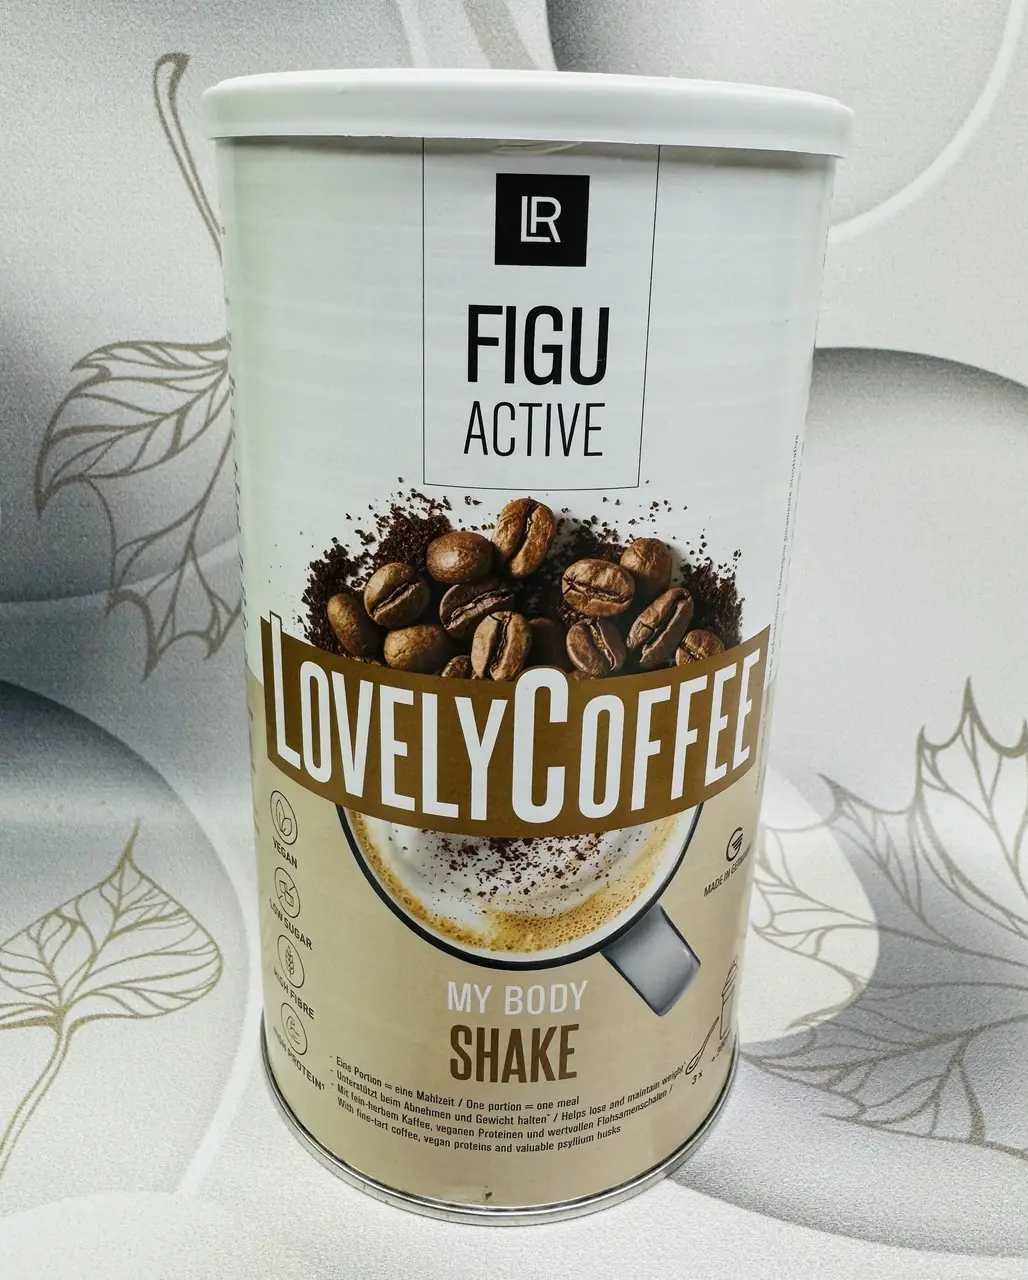 LR FIGUACTIVE Lovely Coffee Shake - kawowy